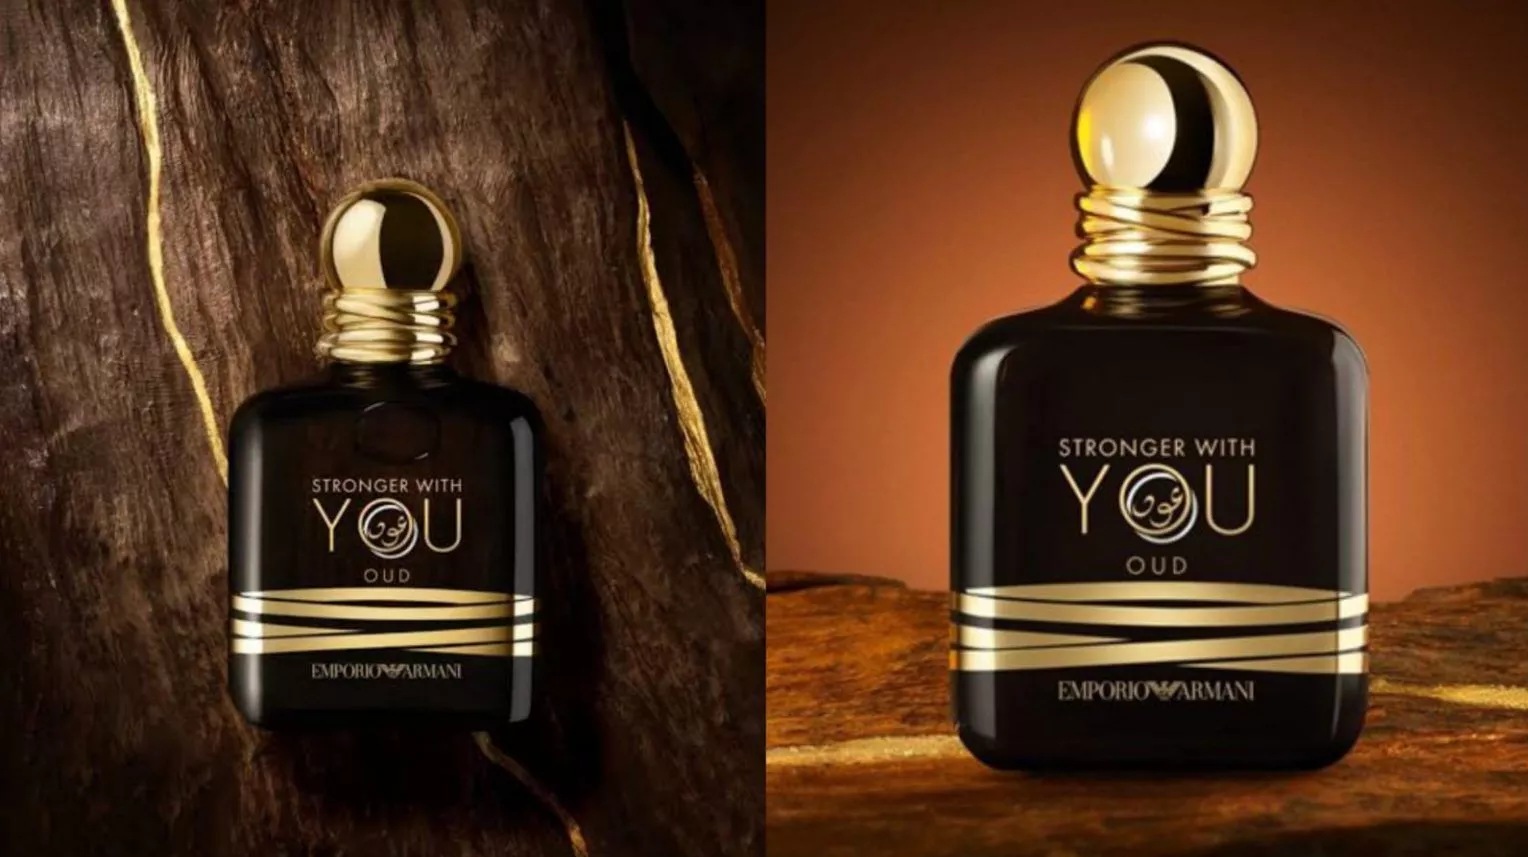 Stronger With You Oud by Emporio Armani